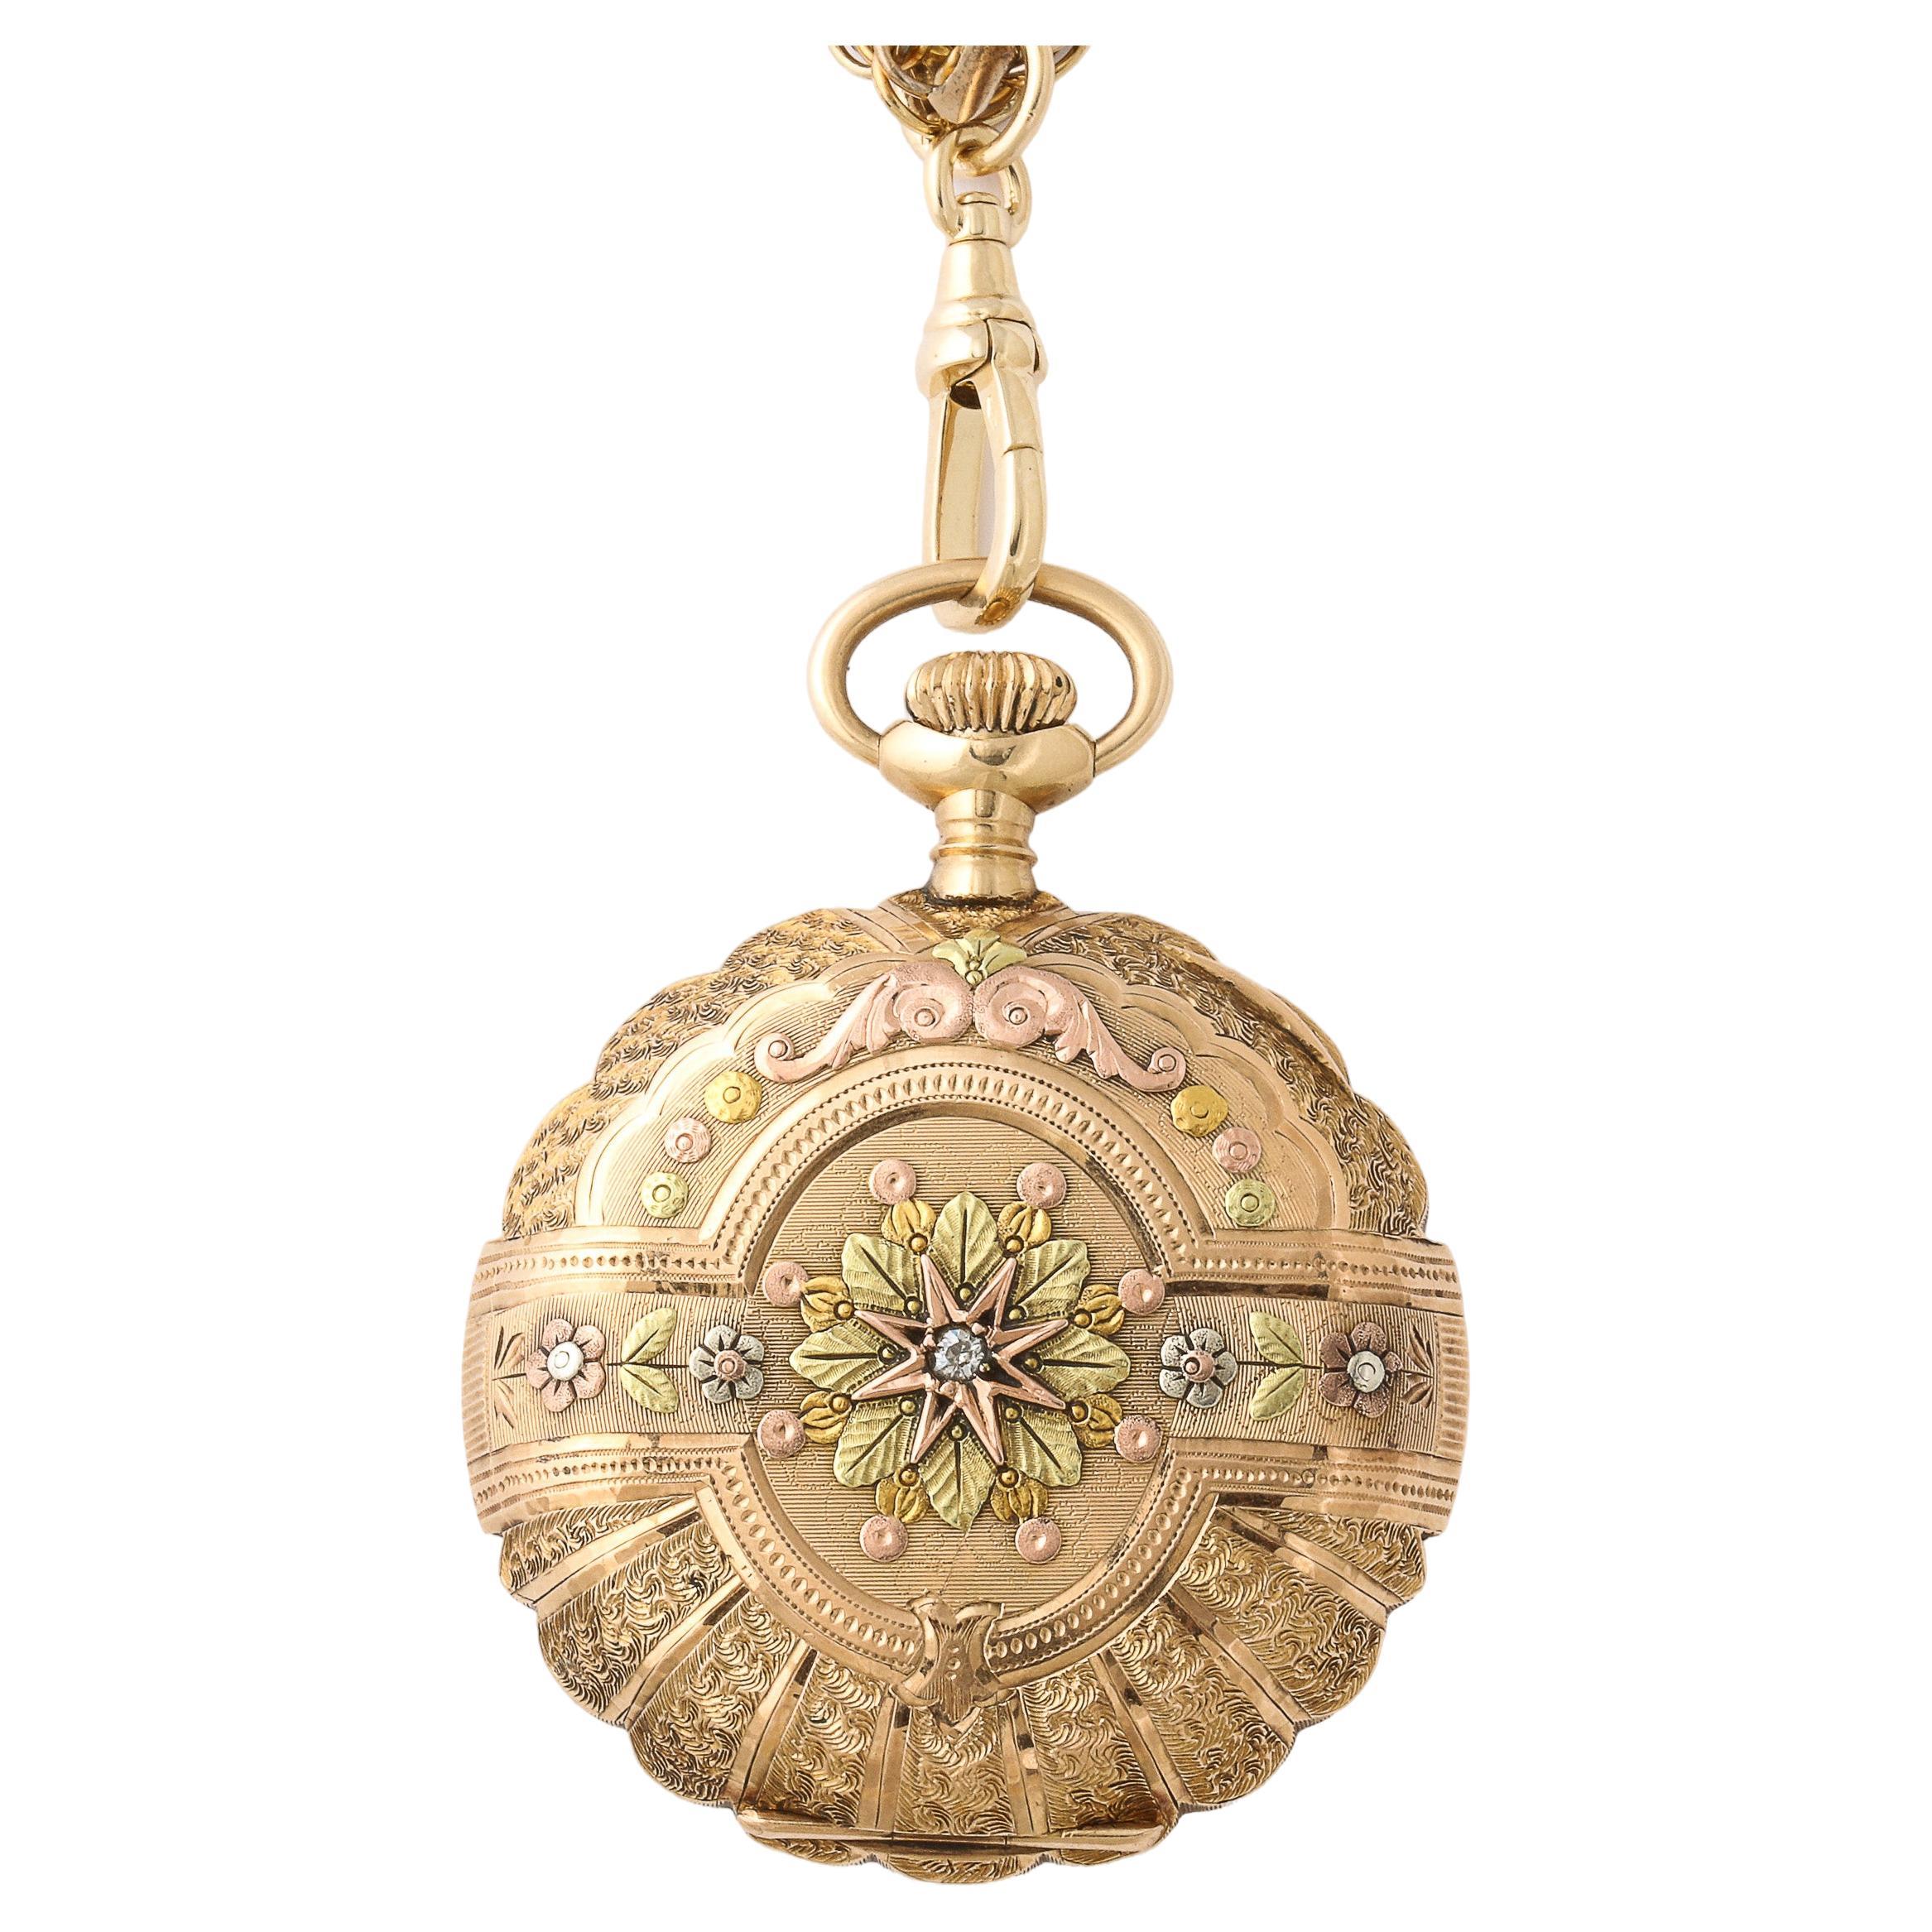 This exquisite Antique 14k four color gold hunter case pocket watch made by the Elgin Company around 1908 (based on movement serial # 13333340) features an elaborately decorated 14 carat  yellow, rose, green and white gold full hunter case, foliate